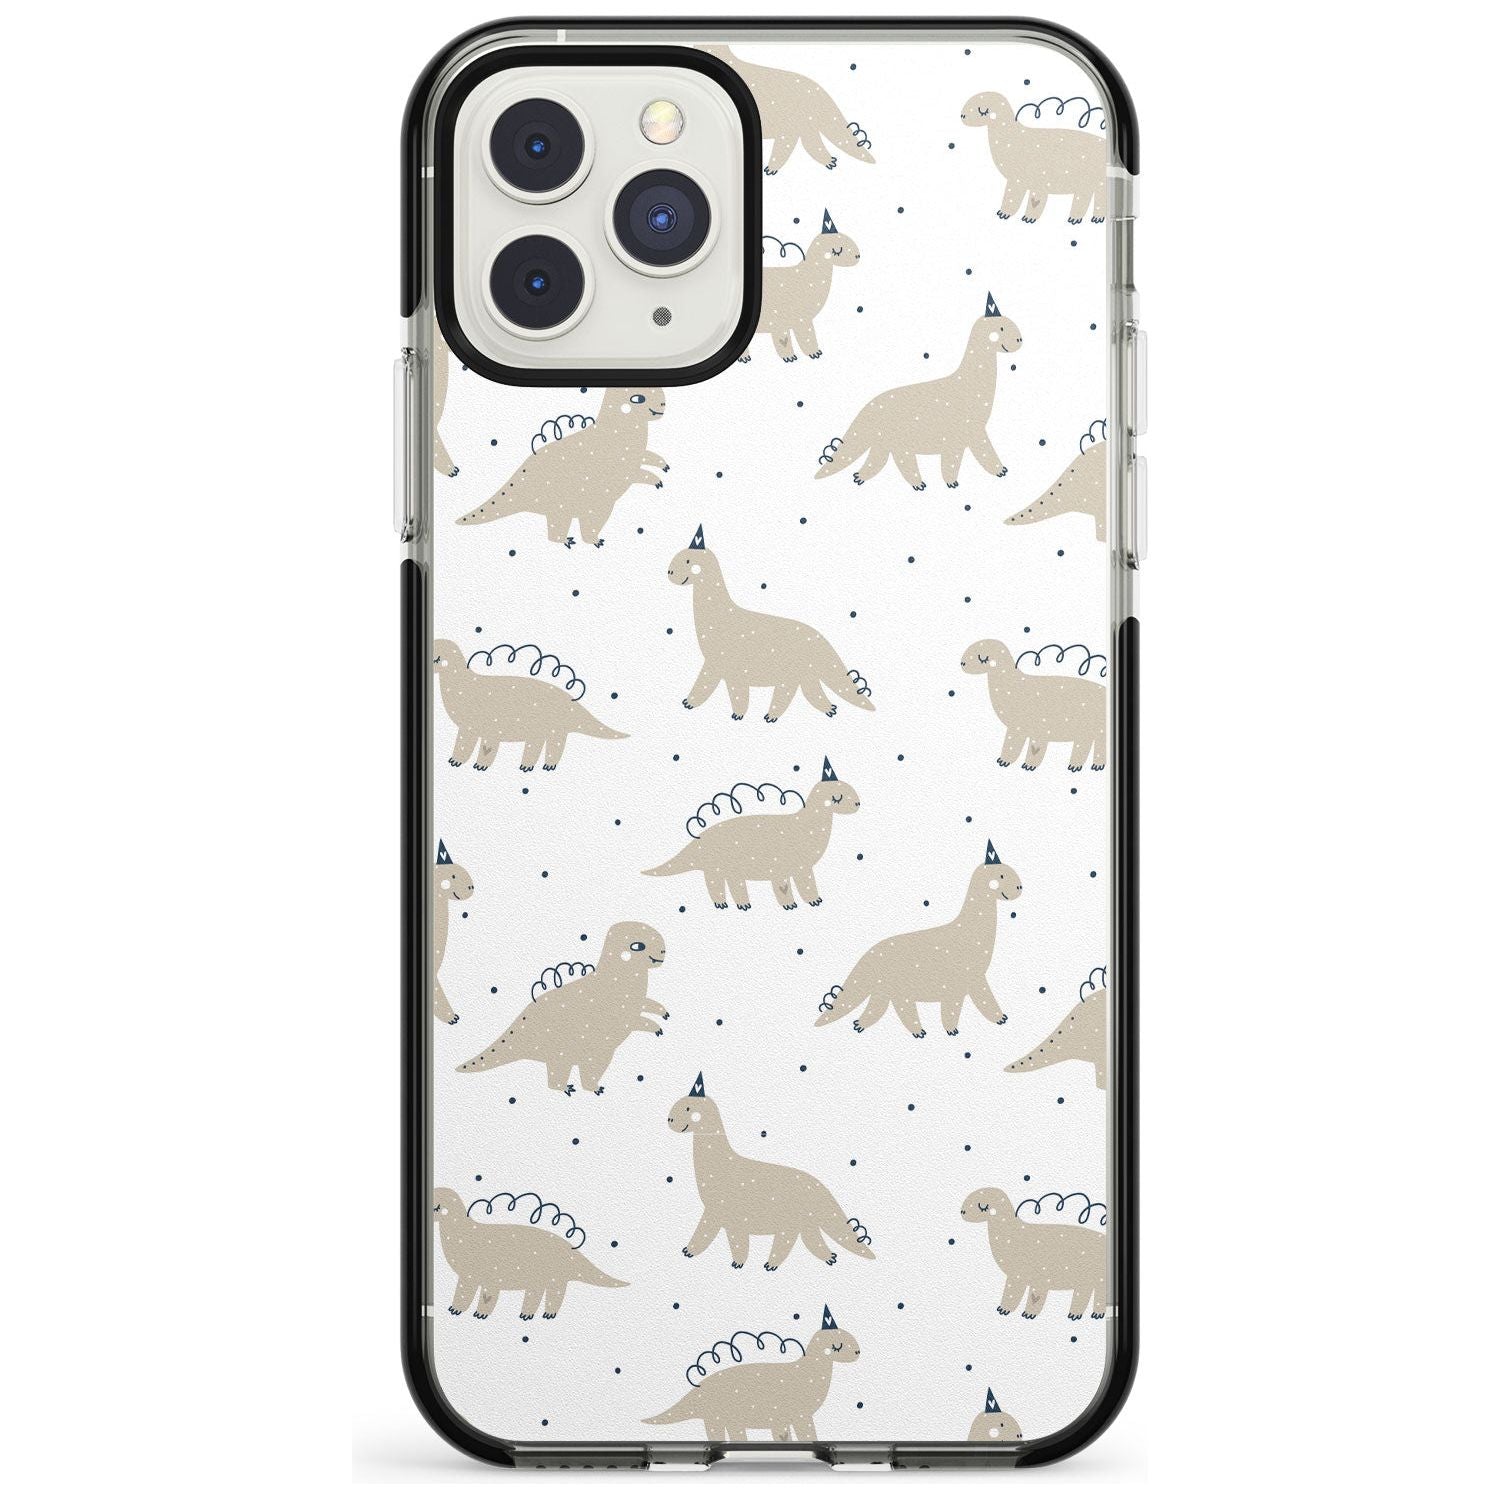 Adorable Dinosaurs Pattern Black Impact Phone Case for iPhone 11 Pro Max